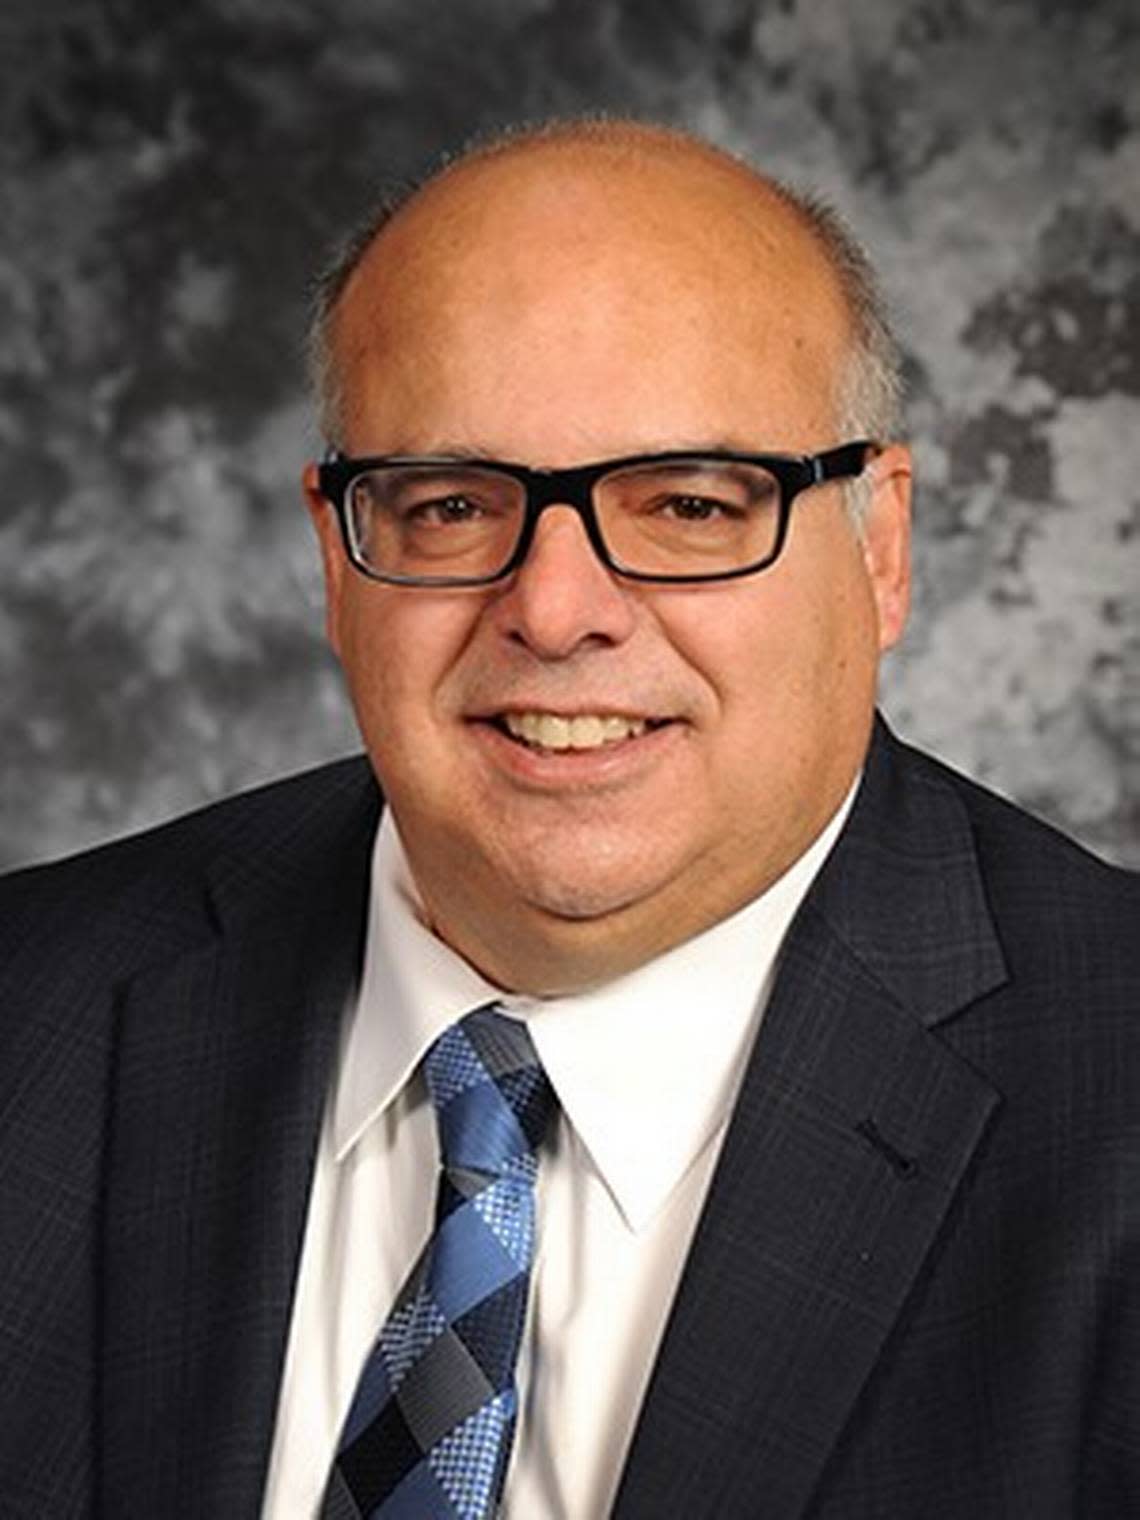 Juan Alvarez is deputy laboratory director for management and operations and chief operations officer at Idaho National Laboratory.